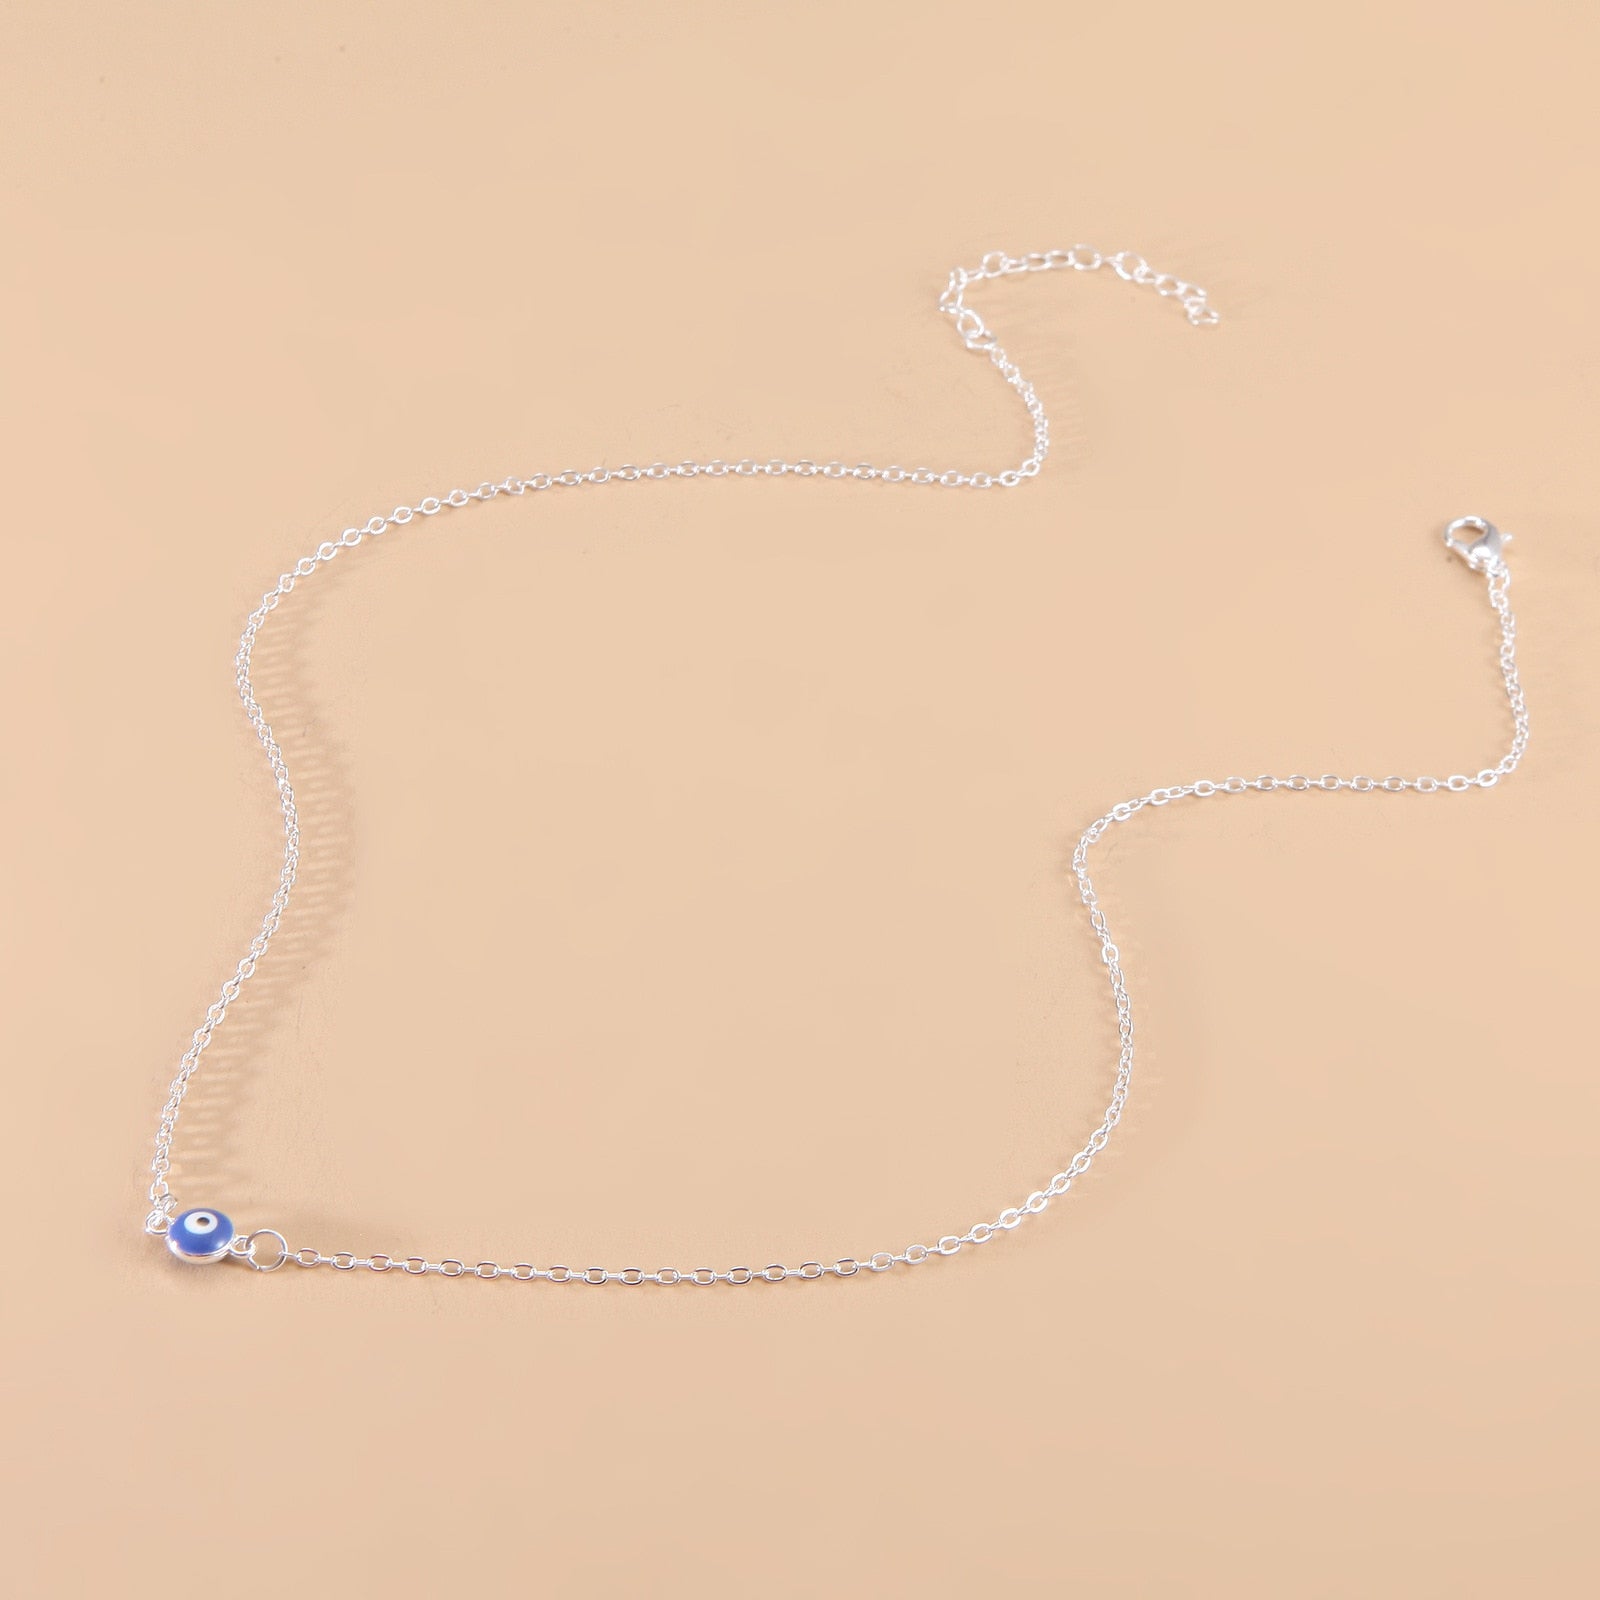 Gift Necklace